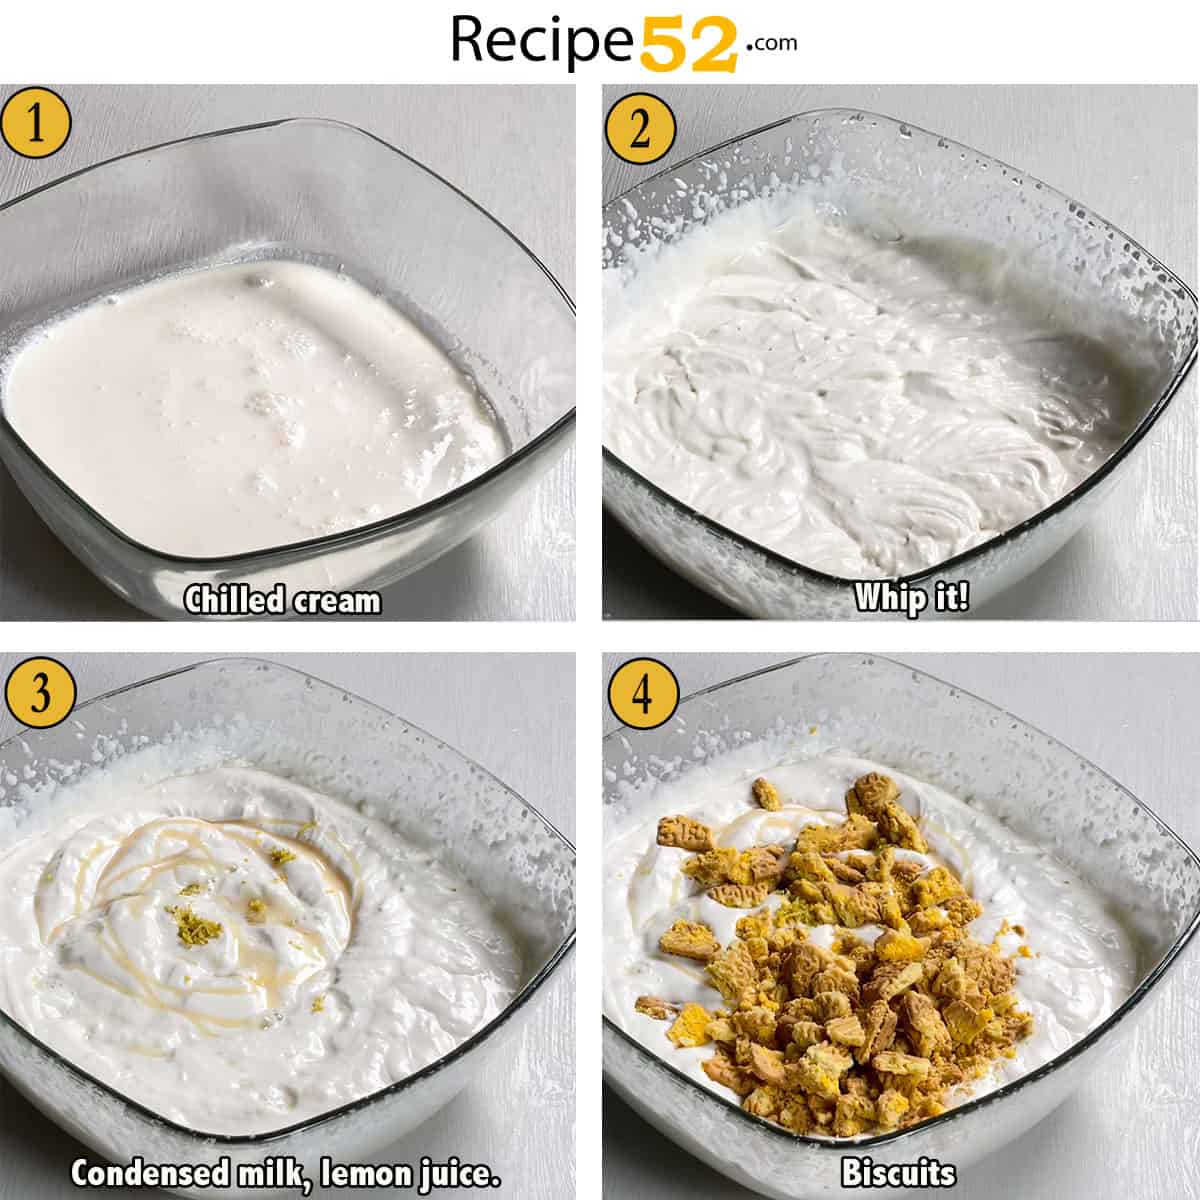 Steps to whip cream and assemble.